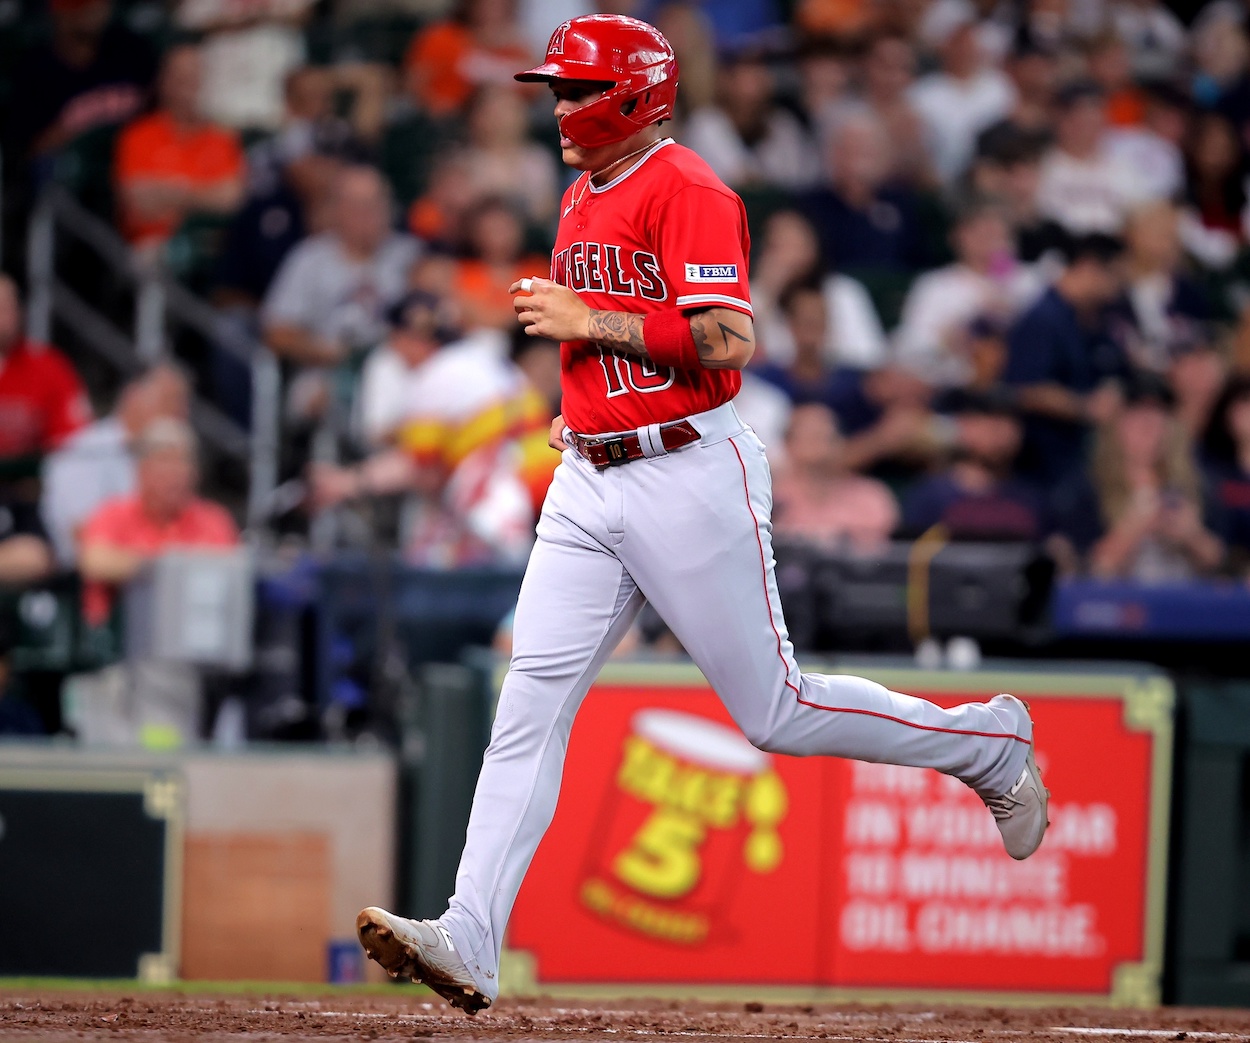 Angels Injury Update: Gio Urshela Expected To Miss Significant